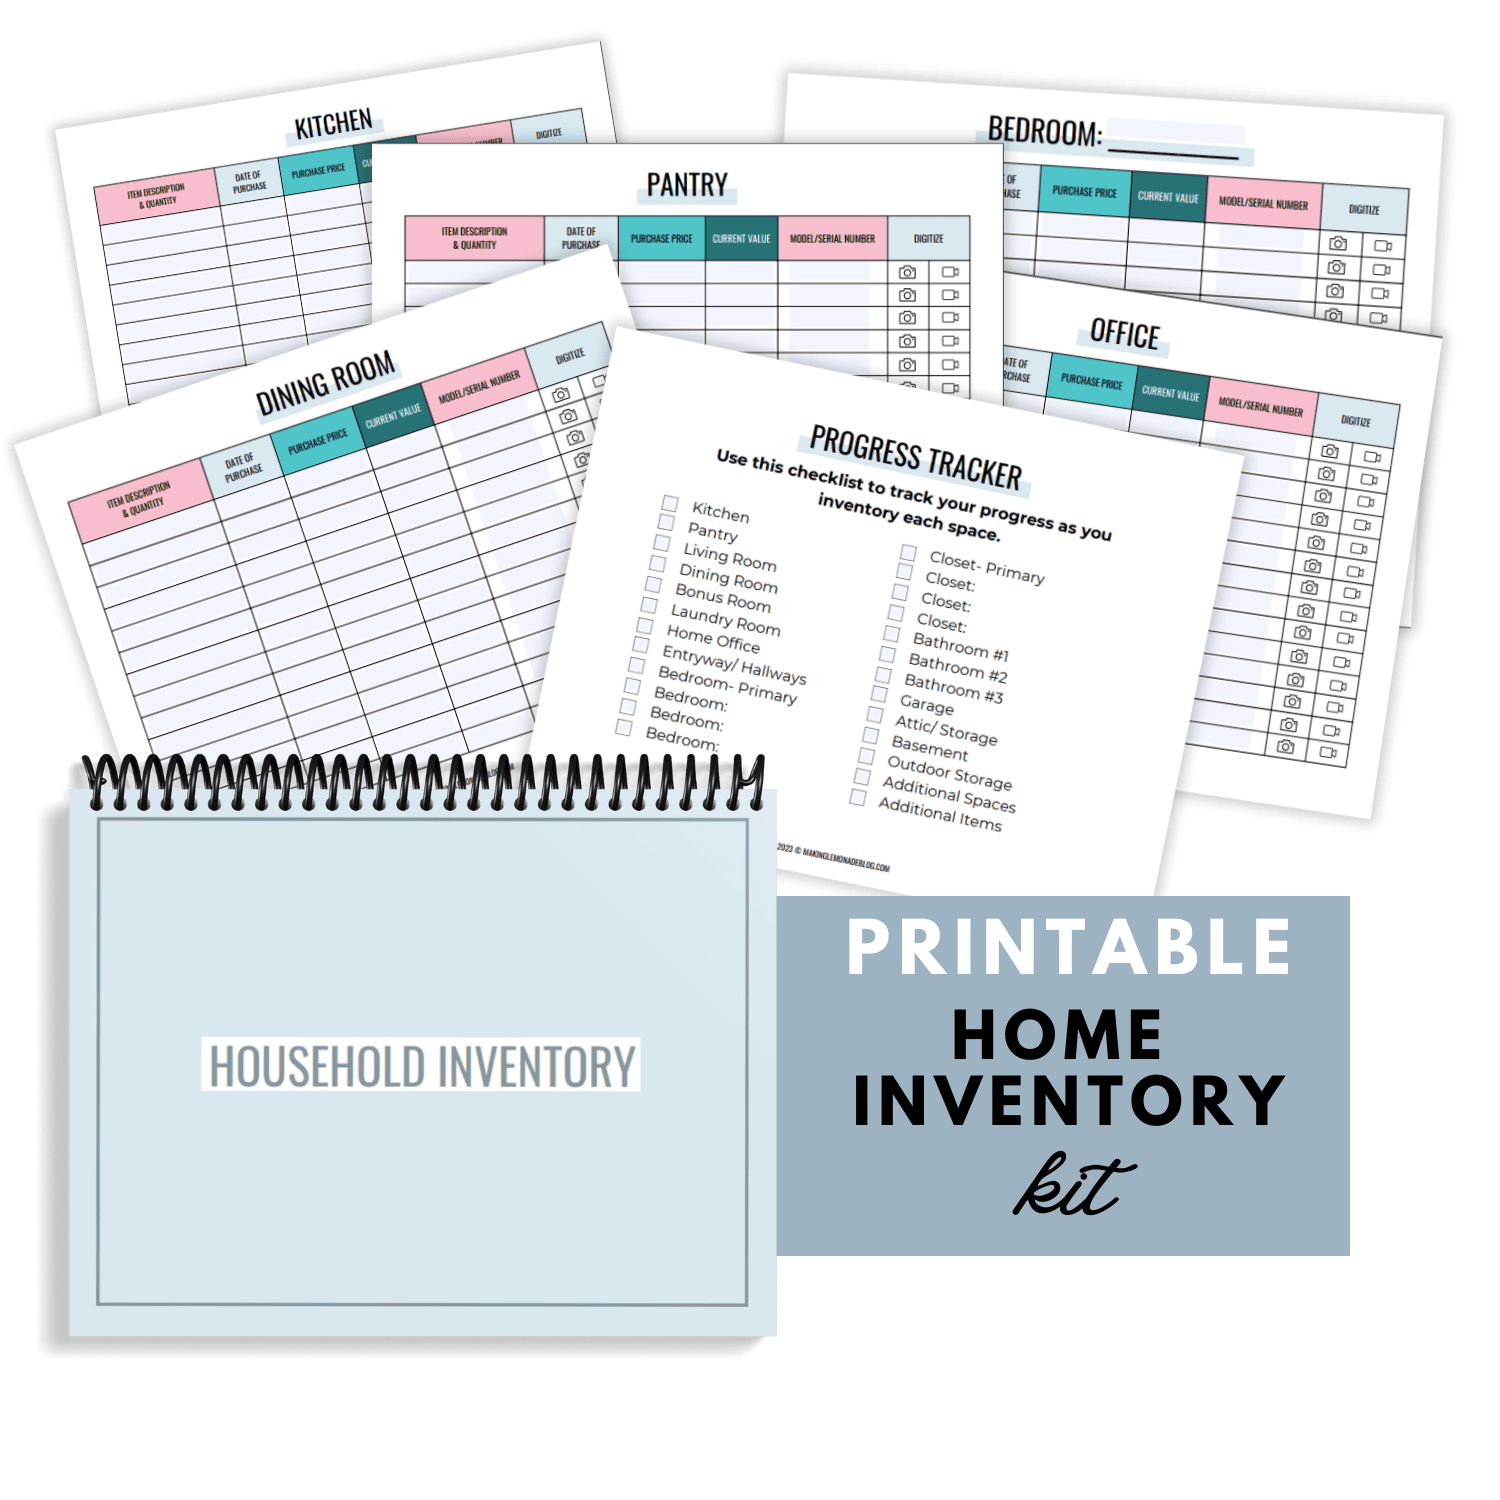 contents of printable home inventory kit.